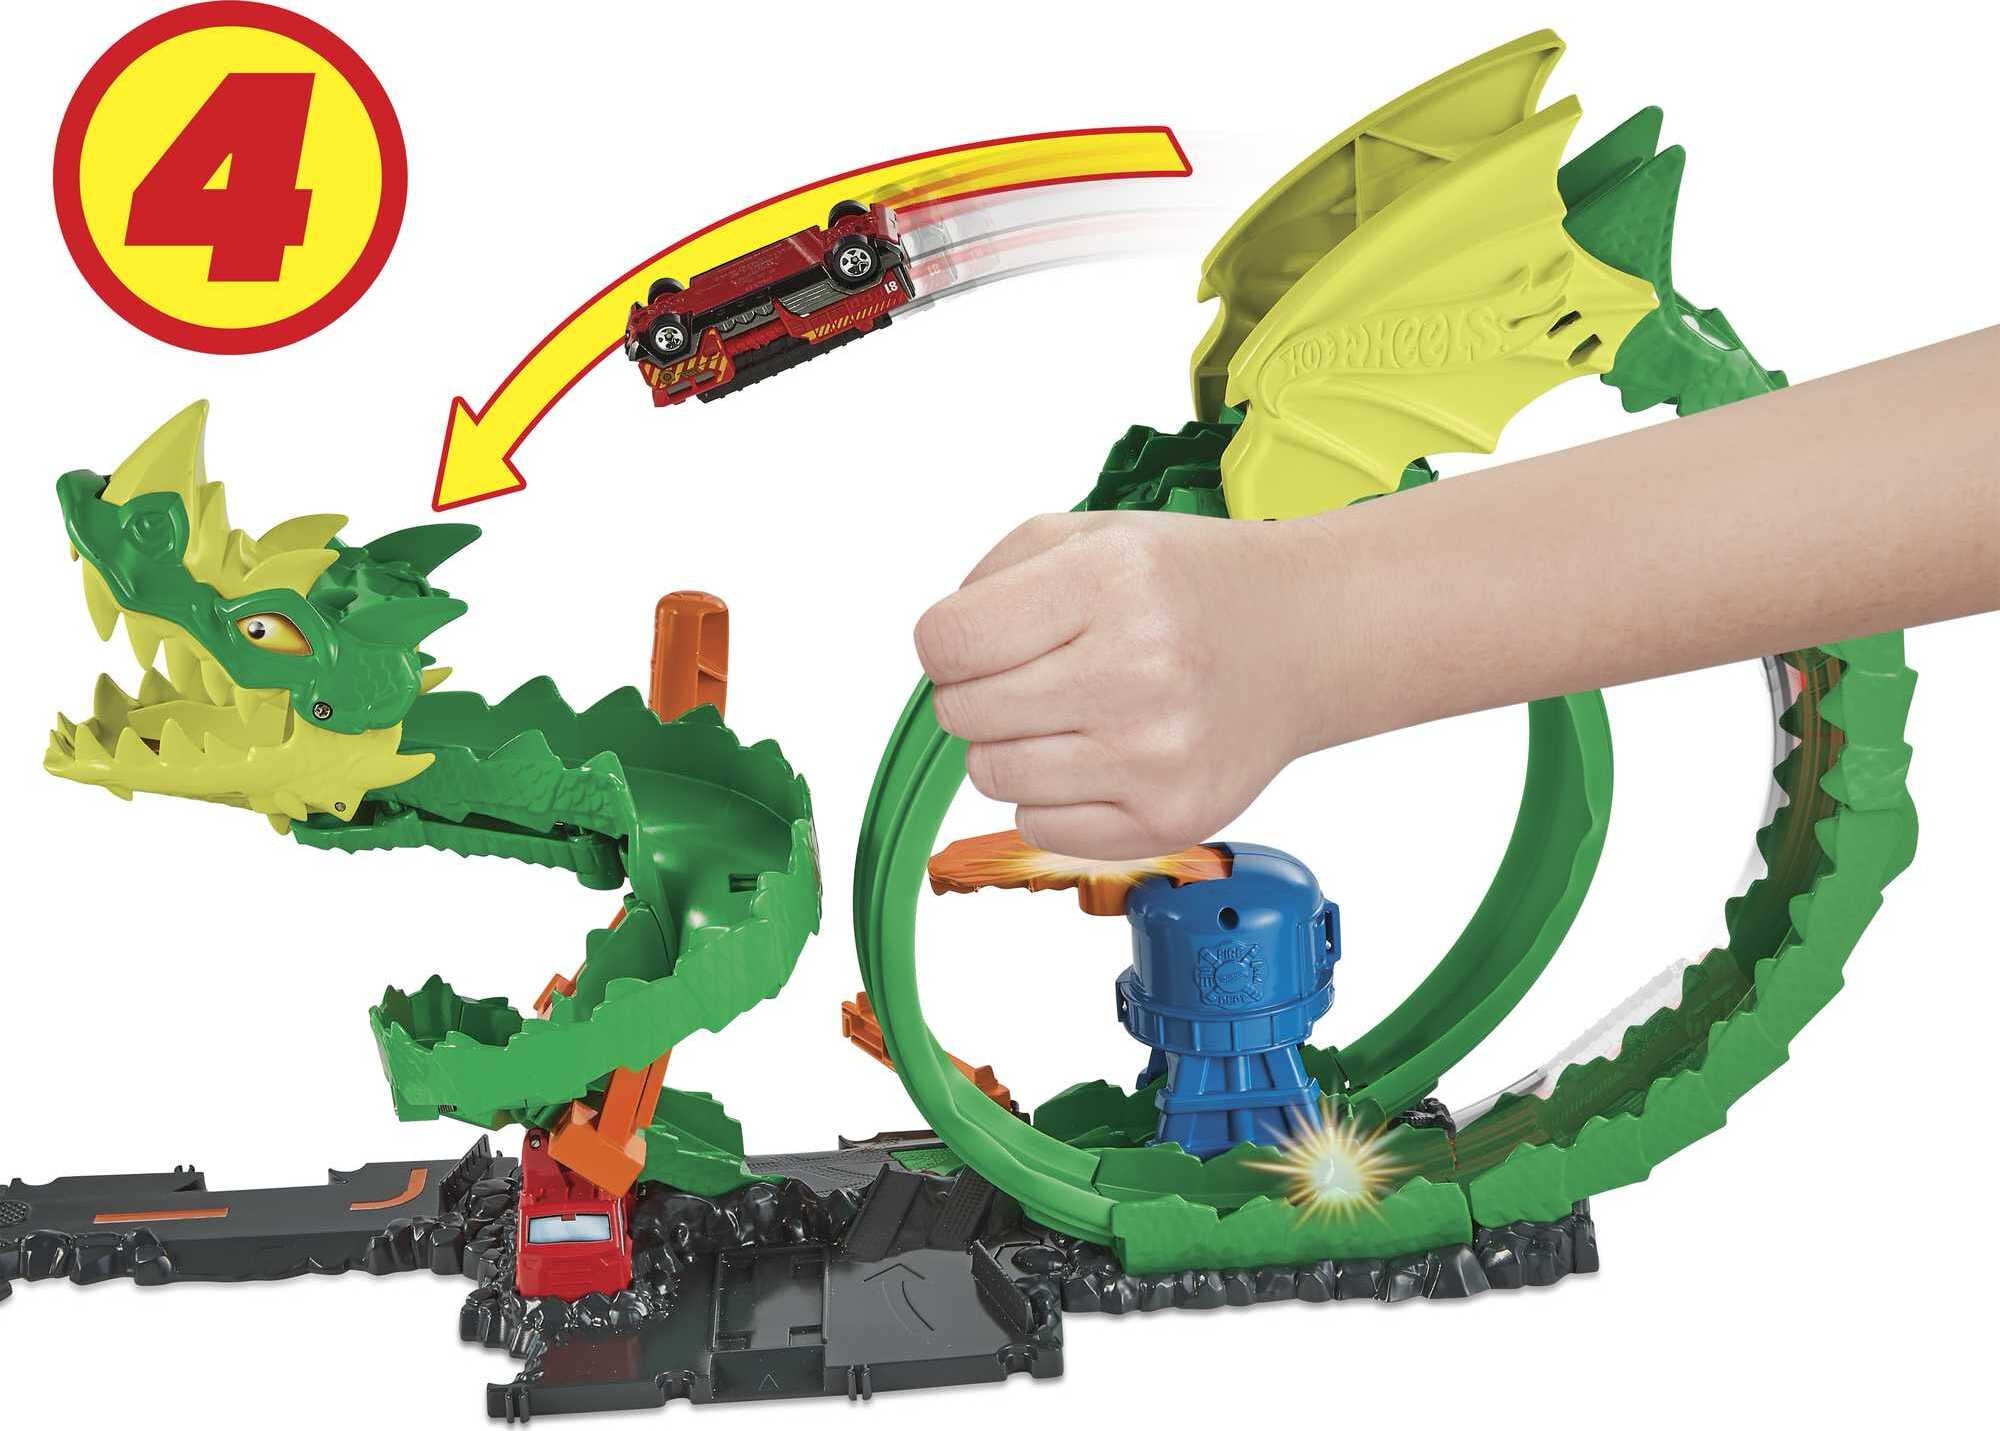 Hot Wheel Dragon Drive Fire Fight Track Set/1:64 Scale Toy